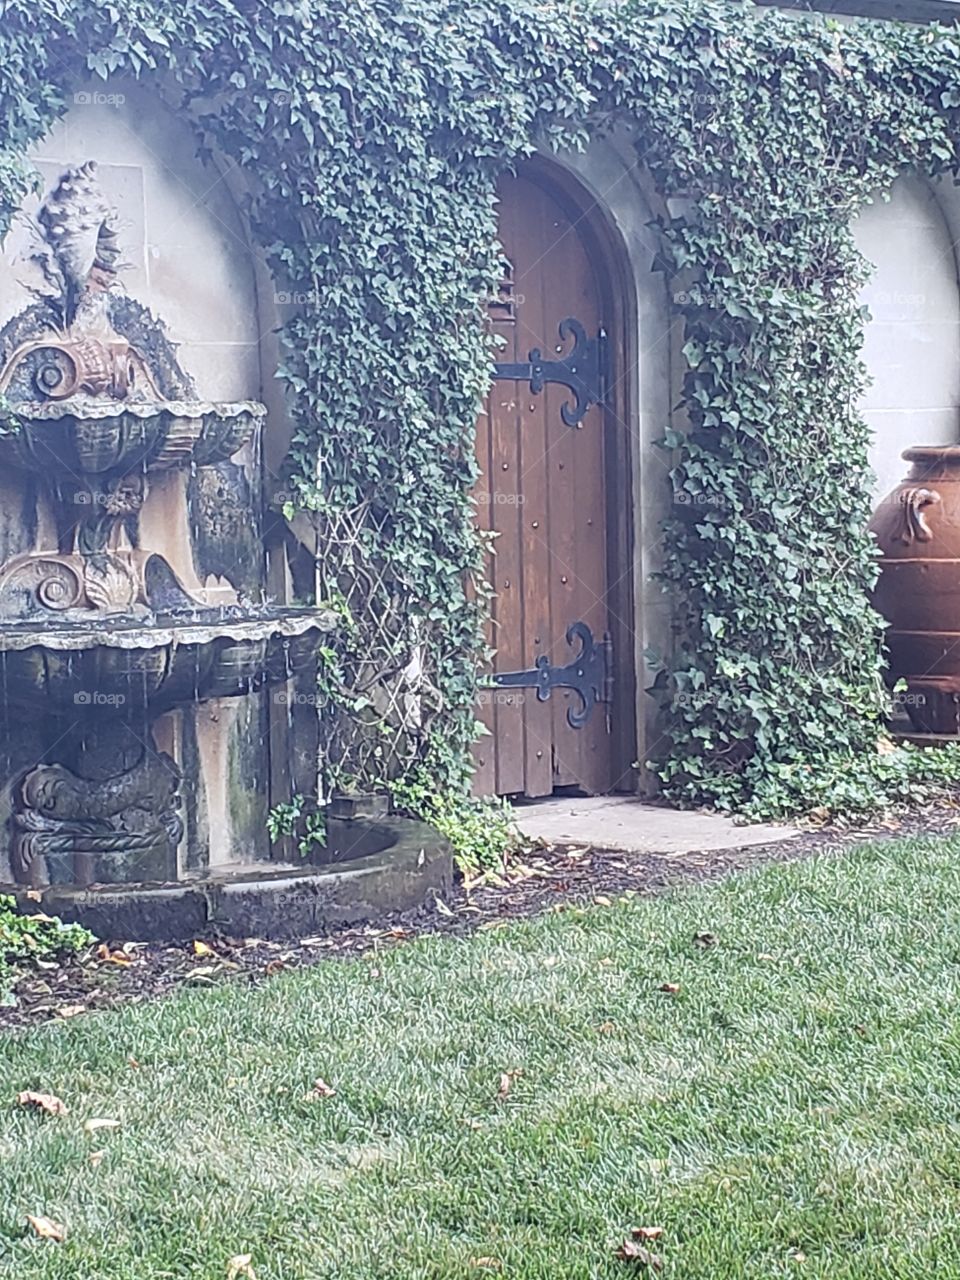 Old wooden door nestled between English Ivy arches and water fountains is reminiscent of the entrance to the secret garden